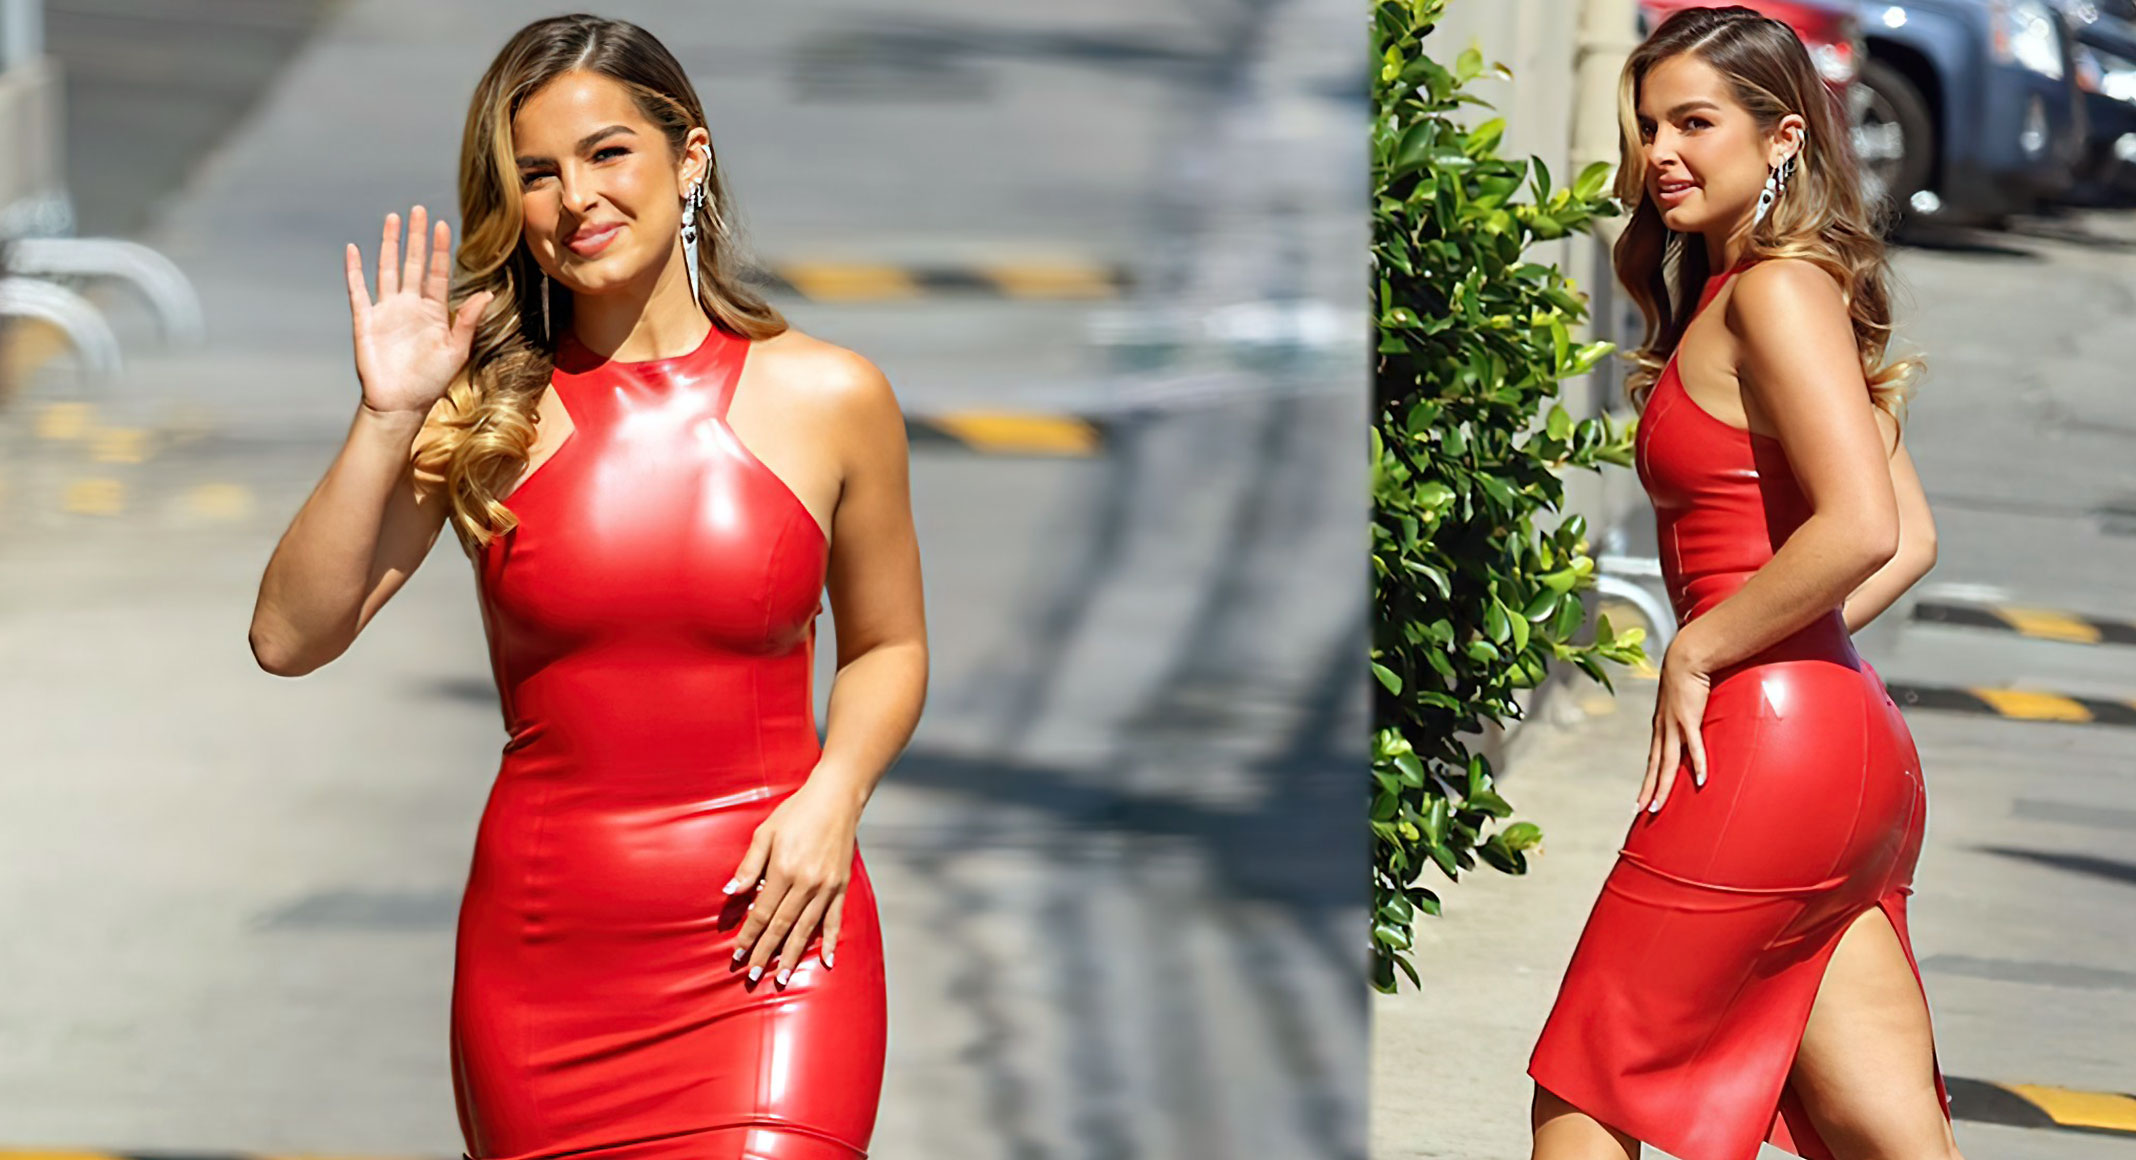 Addison Rae Hot In Red Dress.